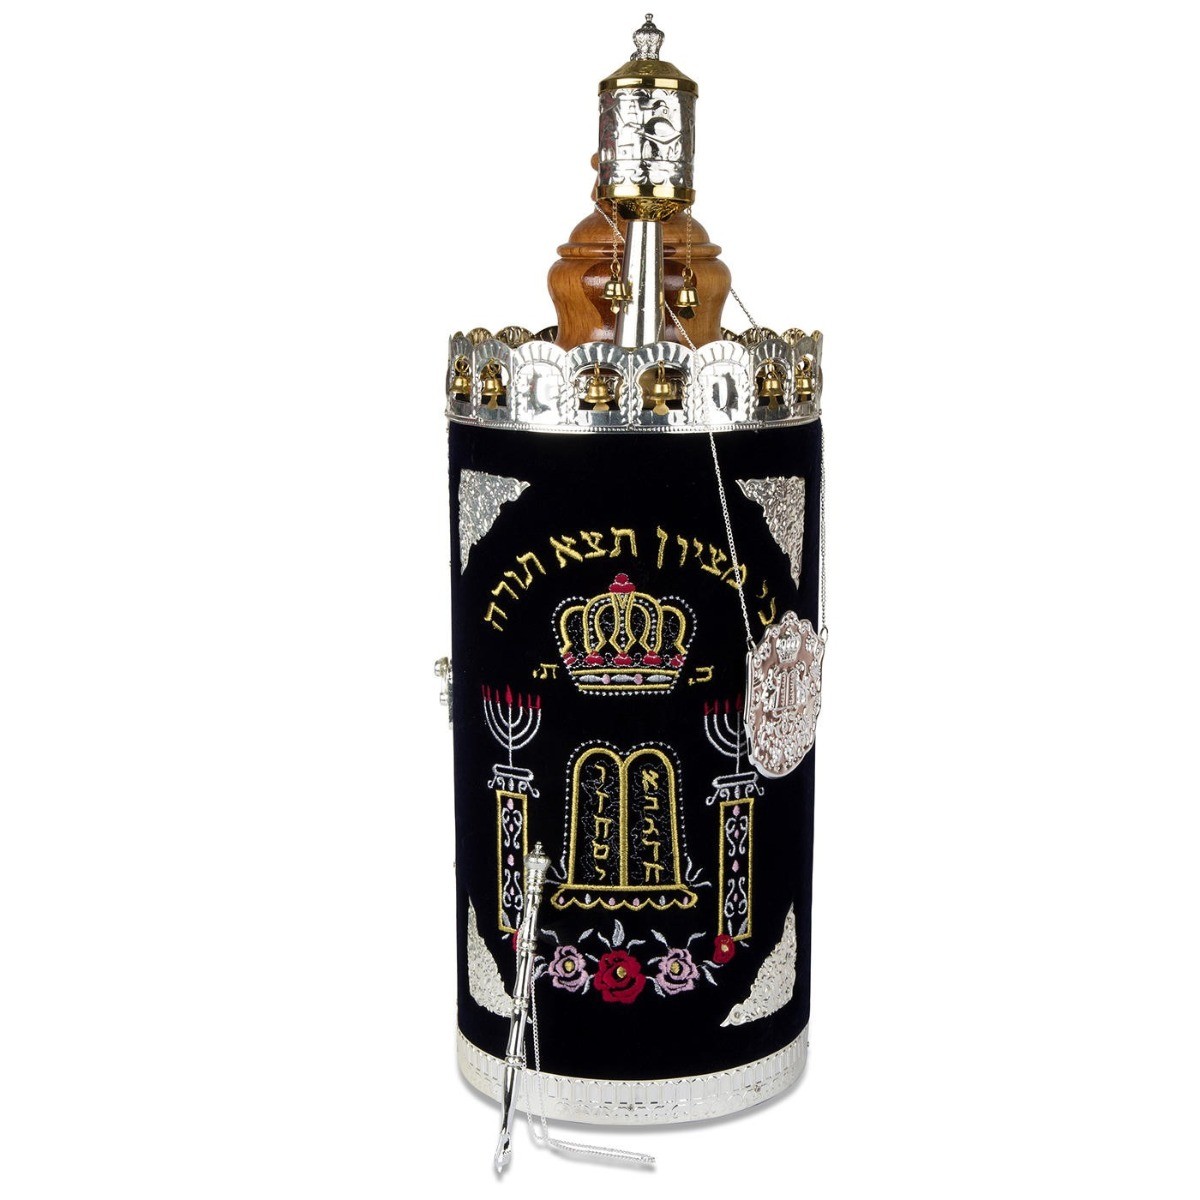 Deluxe Torah Scroll Replica - Small, Jewish Gifts from Israel